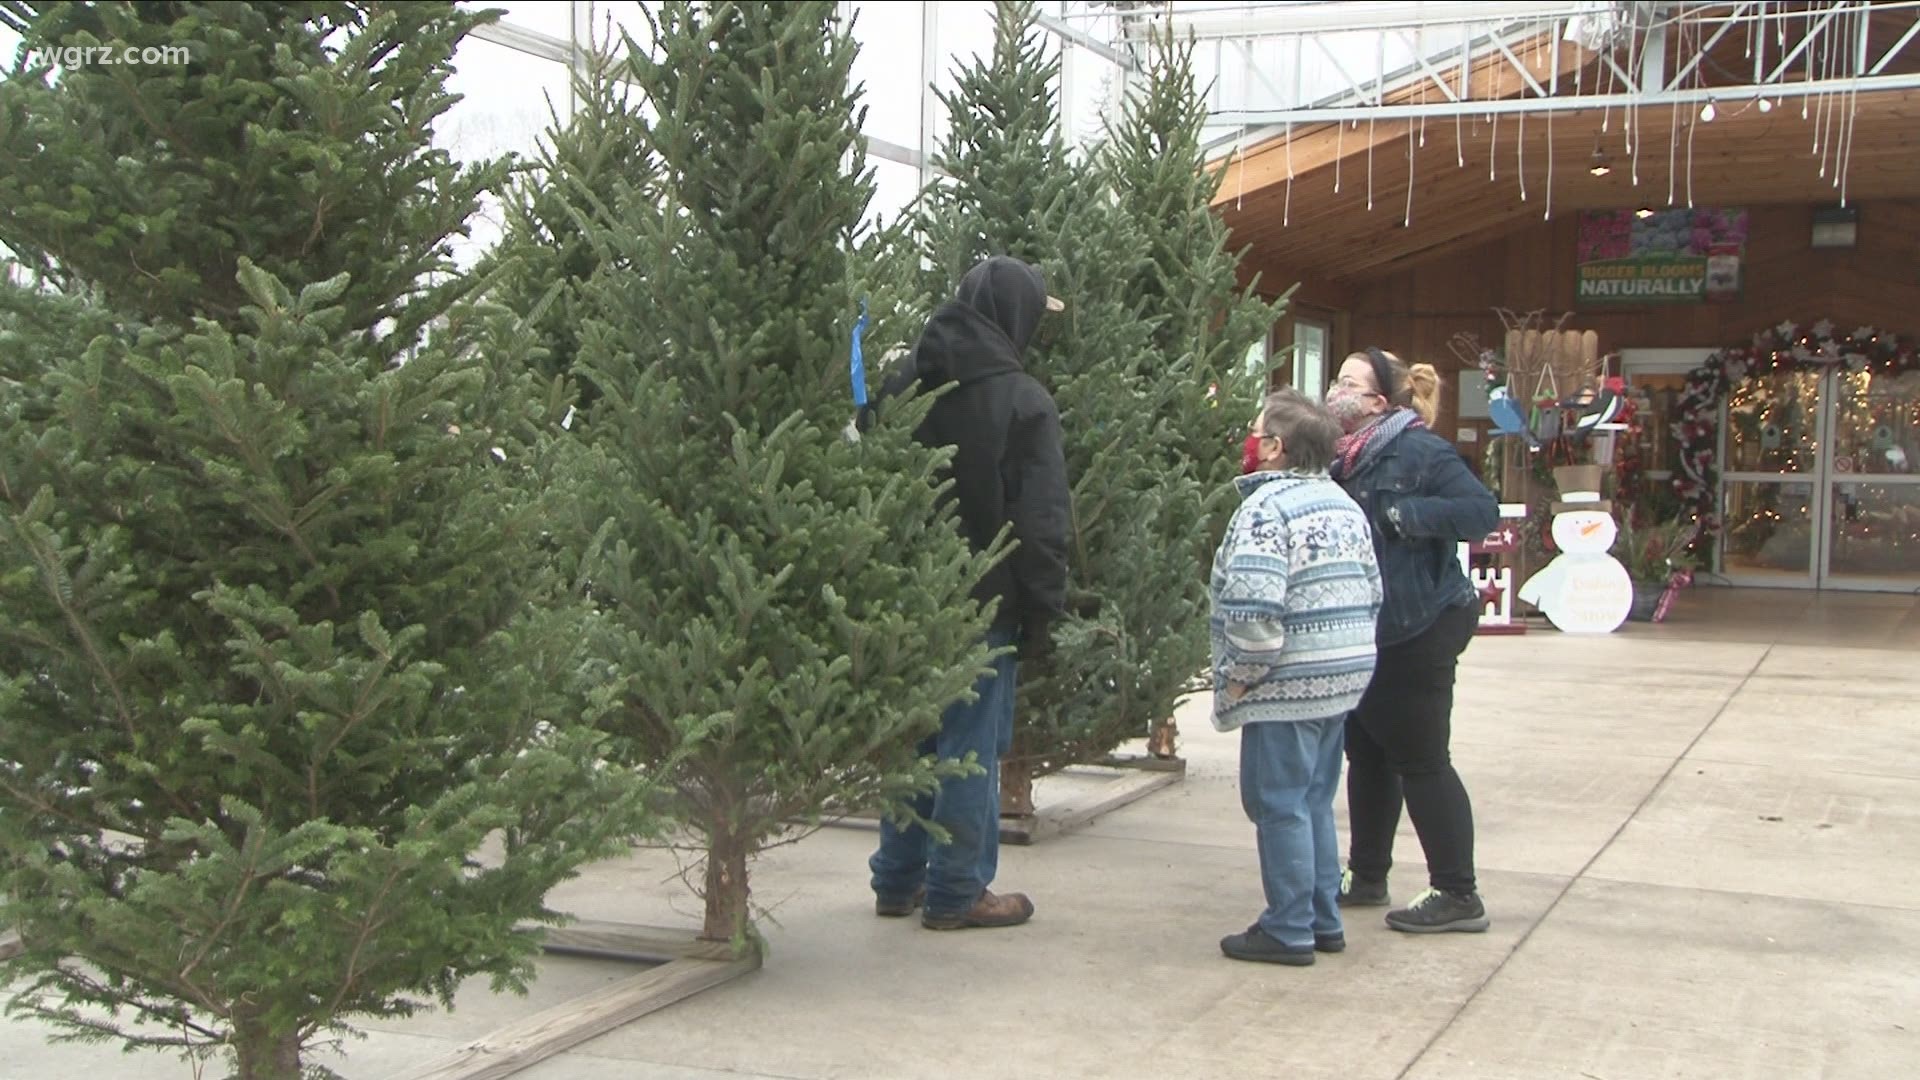 Adams Nursery & Garden Center provided free Christmas trees to frontline workers. One couple thought maybe it wasn't real, but it was a generous act indeed.